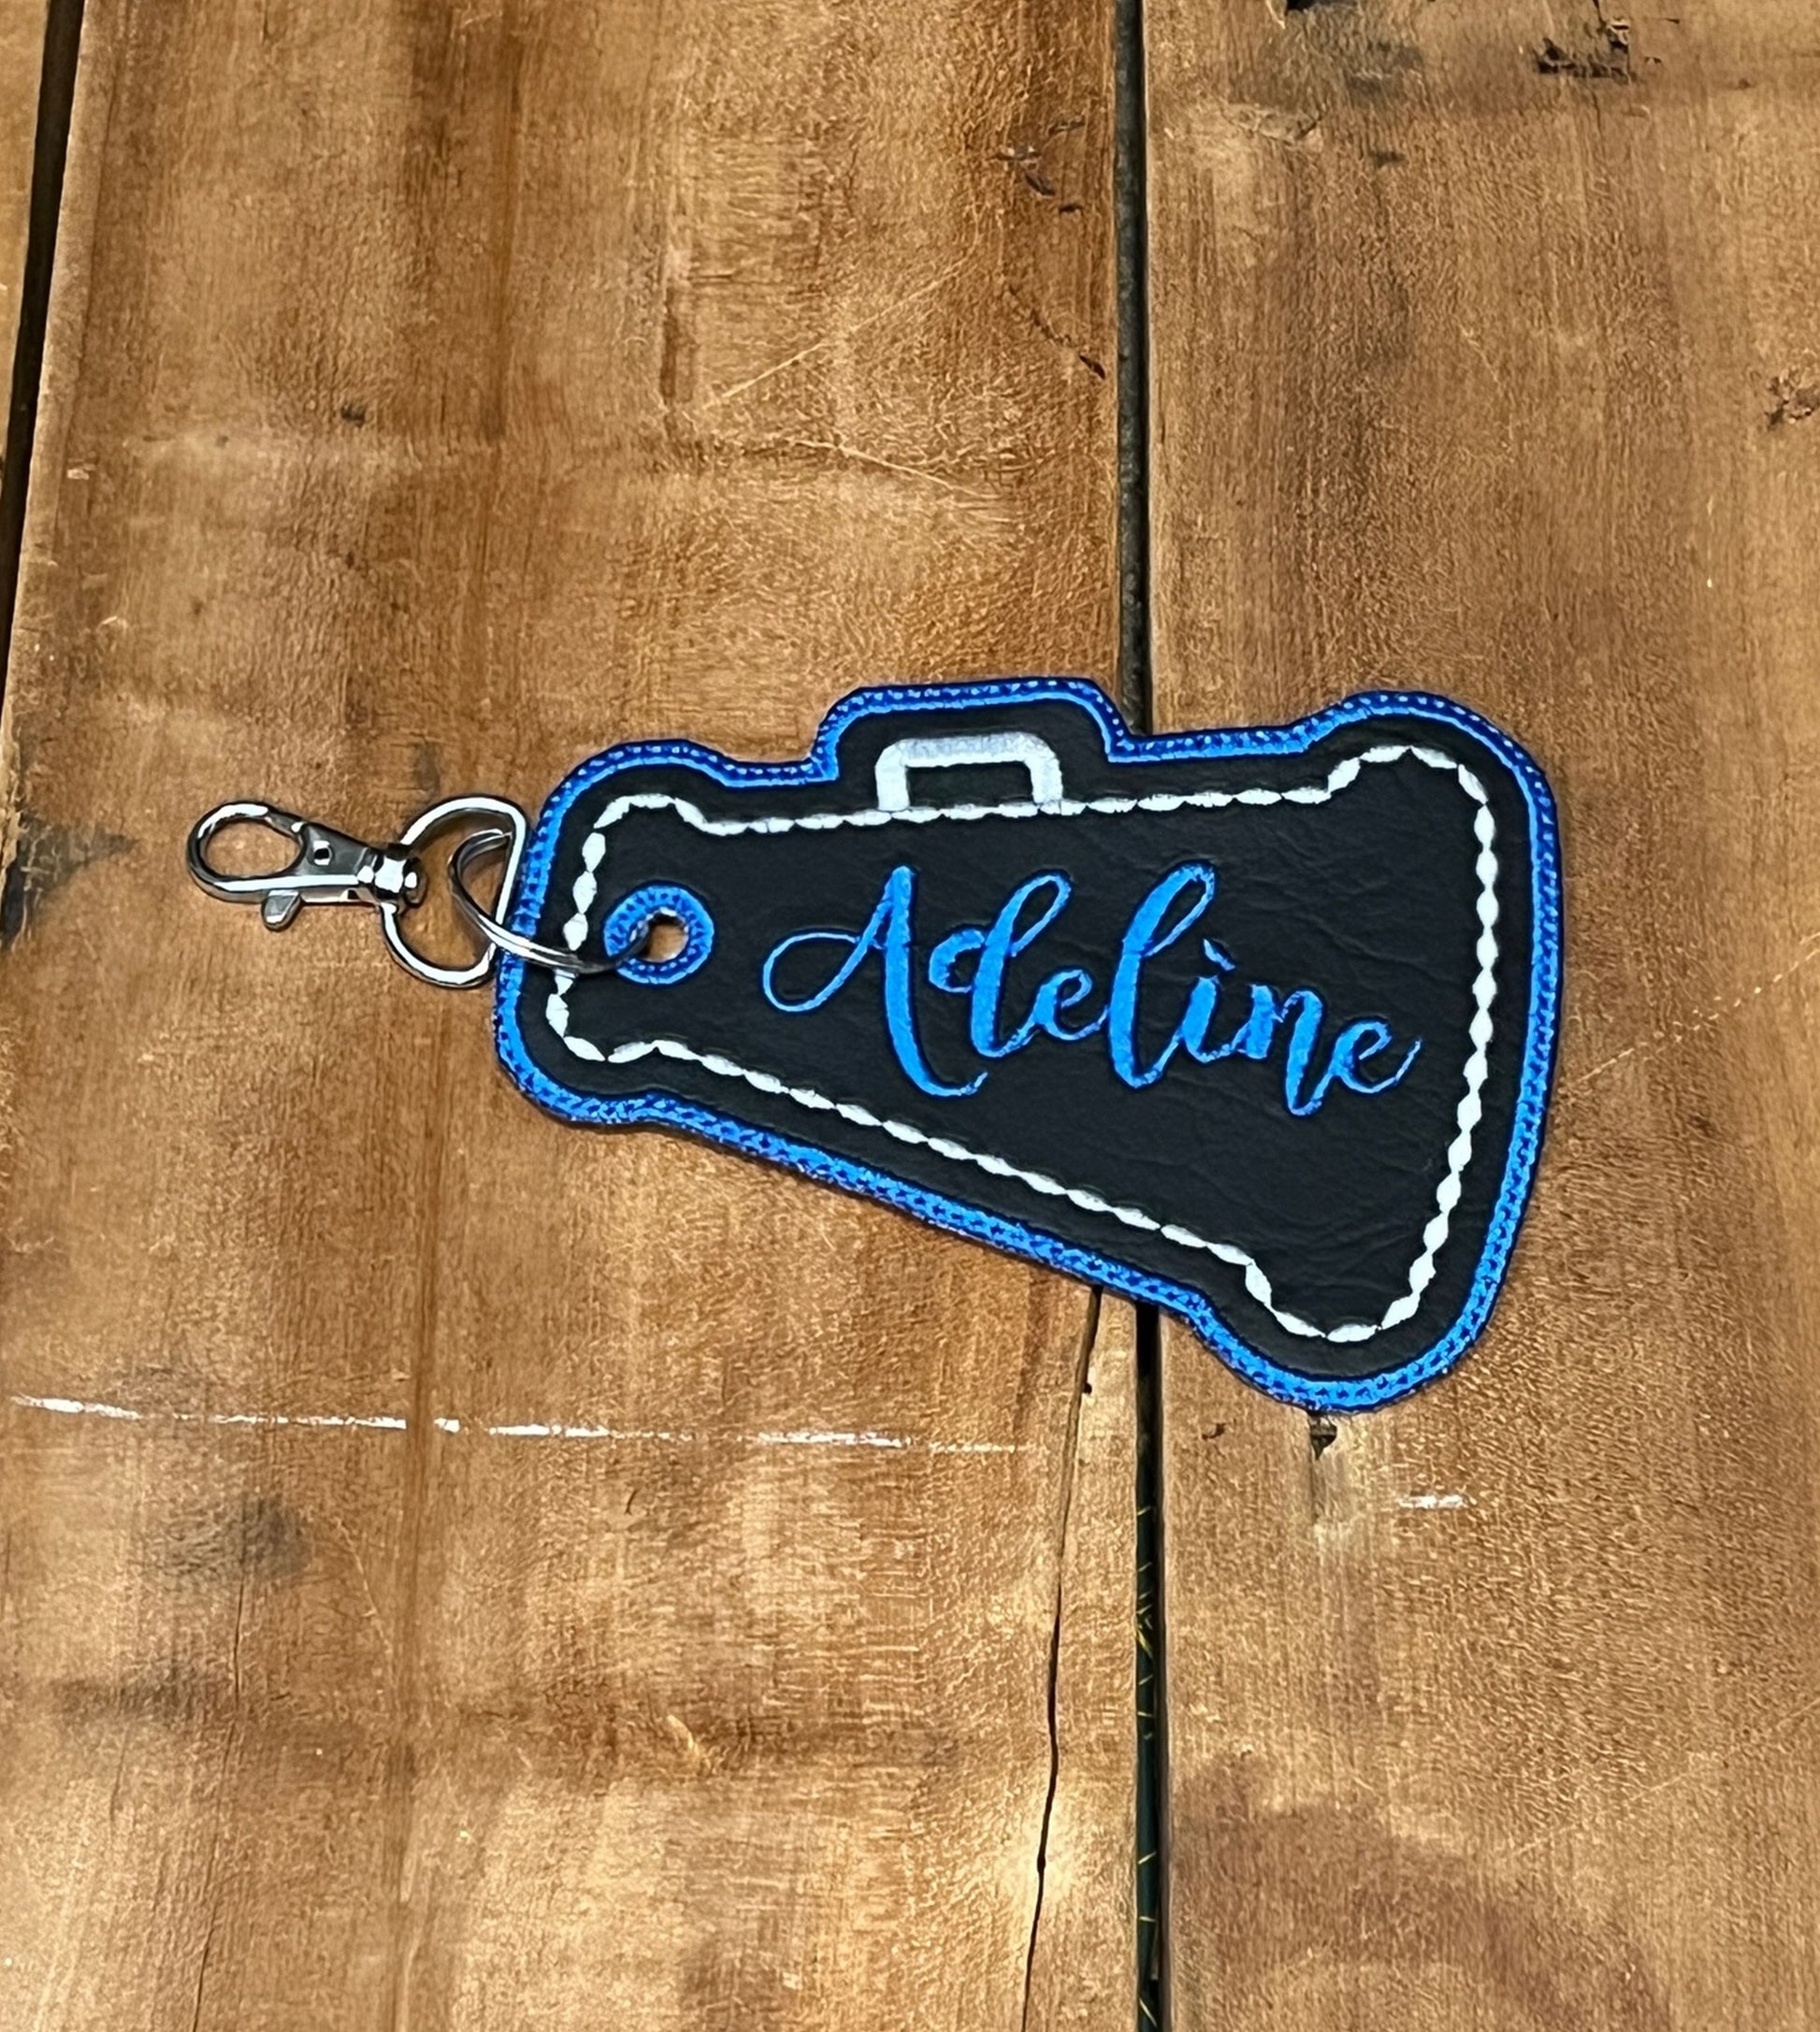 megaphone cheer bag tag shown in black, silver, and blue. Can be personalized with your choice of colors, and name